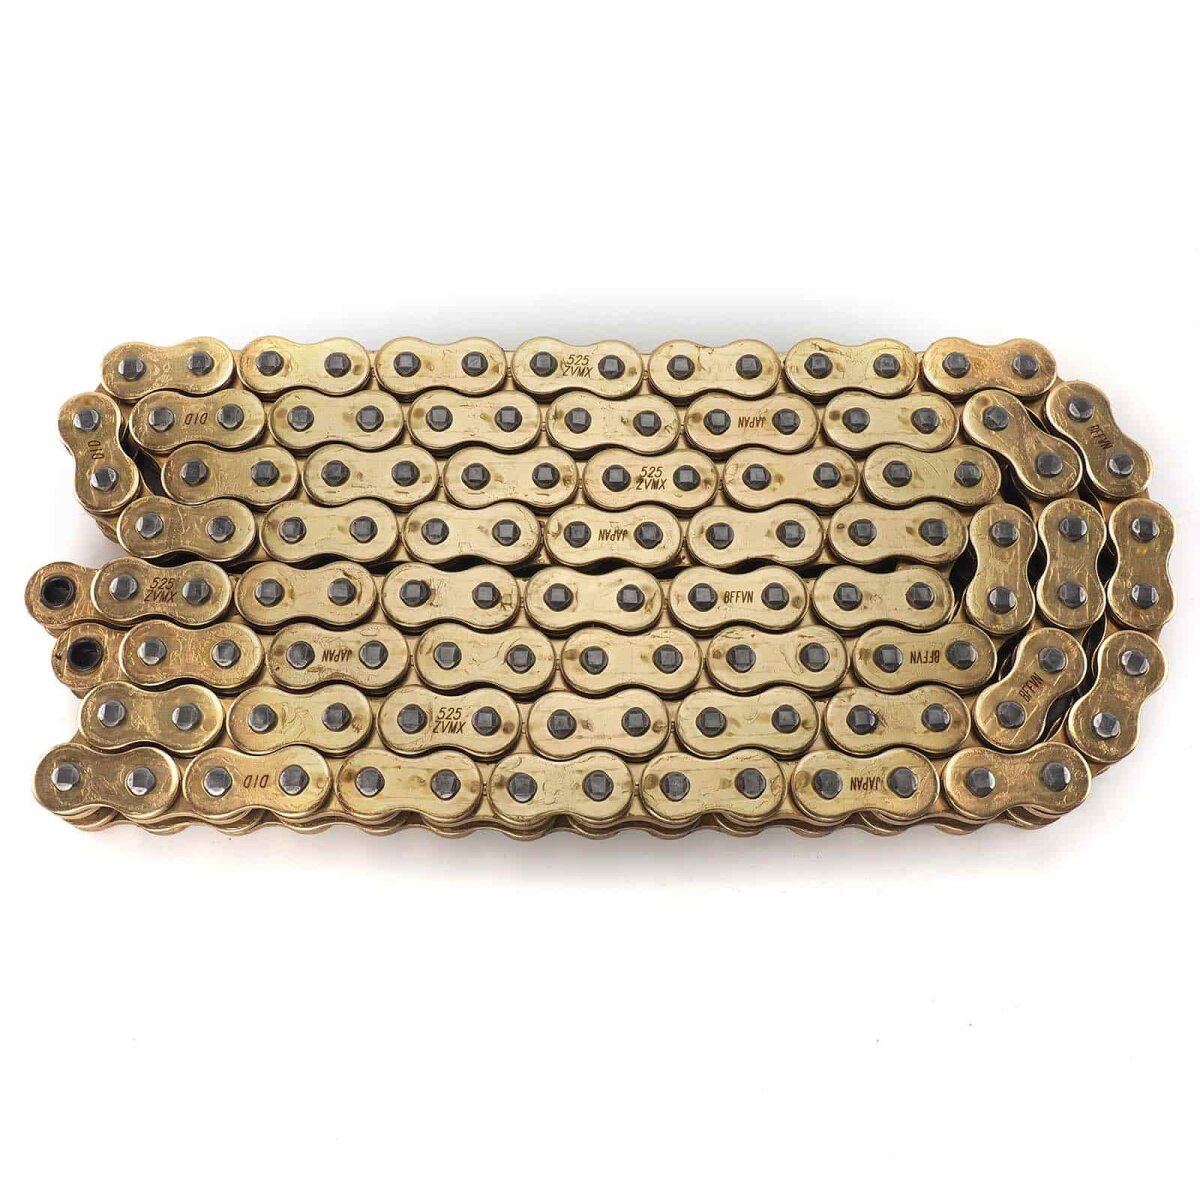 D.I.D X-ring chain G&G 525ZVMX2/118 with rivet lock, 133,90 € for 